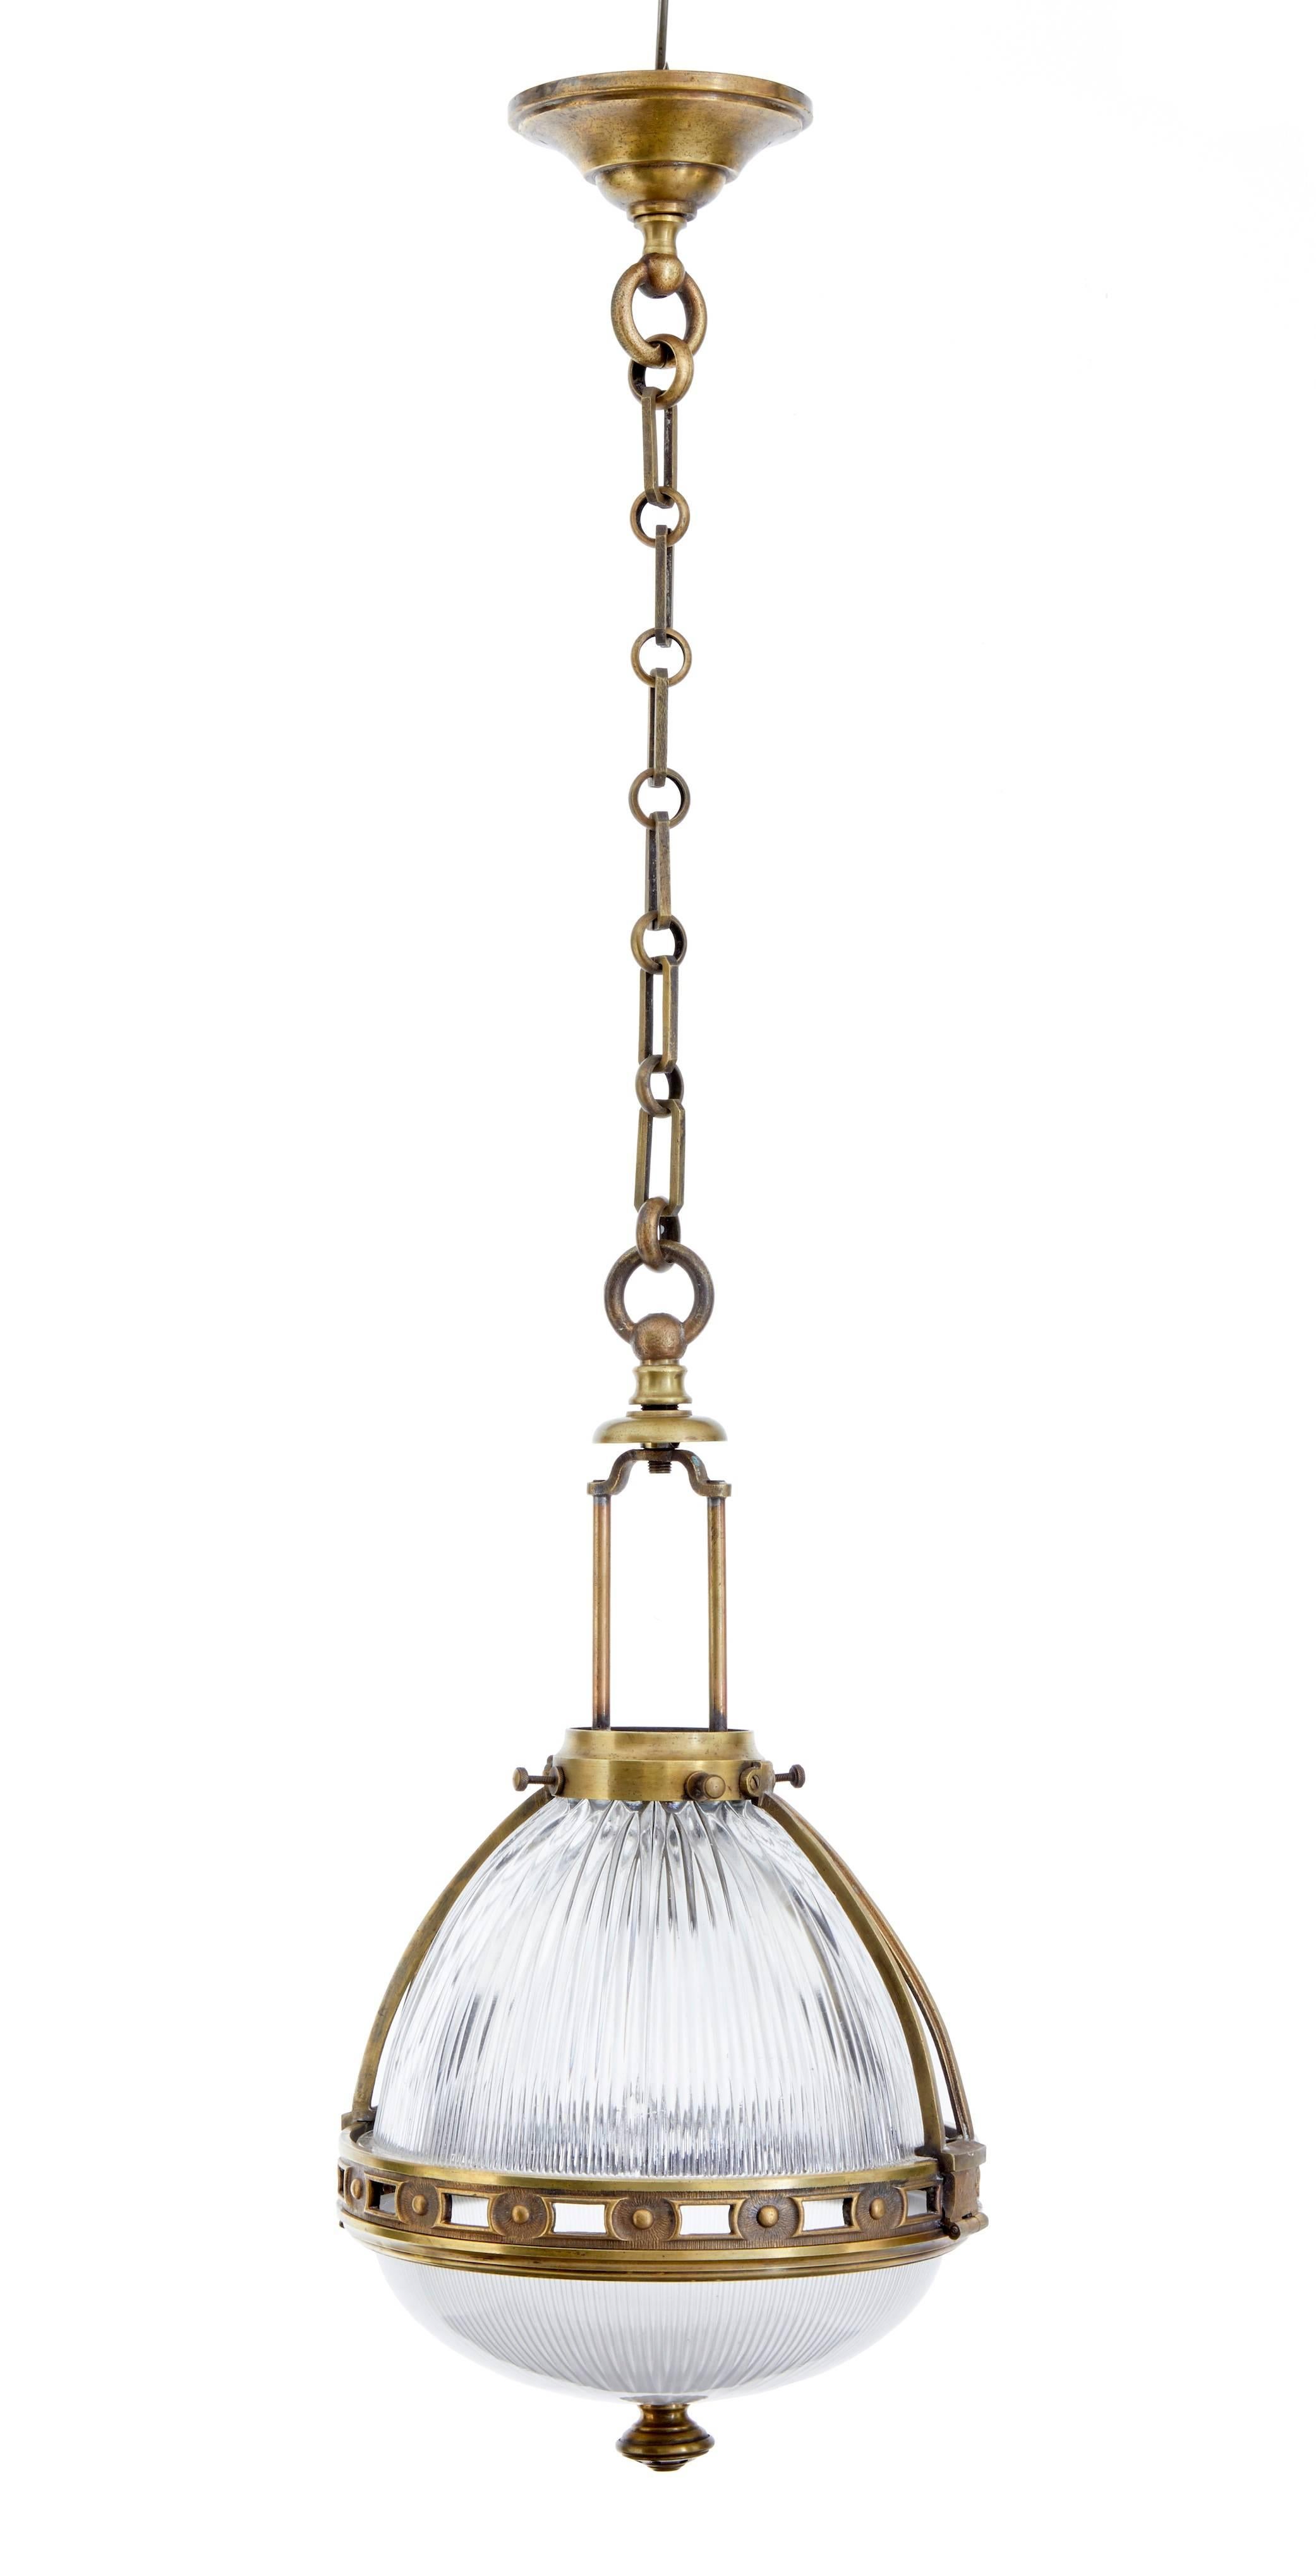 Good quality brass ceiling lights, circa 1930.
Two part glass, with cut-glass to the top and frosted glass to the bottom, encased in a decorative brass frame.
Each containing two-light fittings.
Currently unwired.

Measures: Height 39